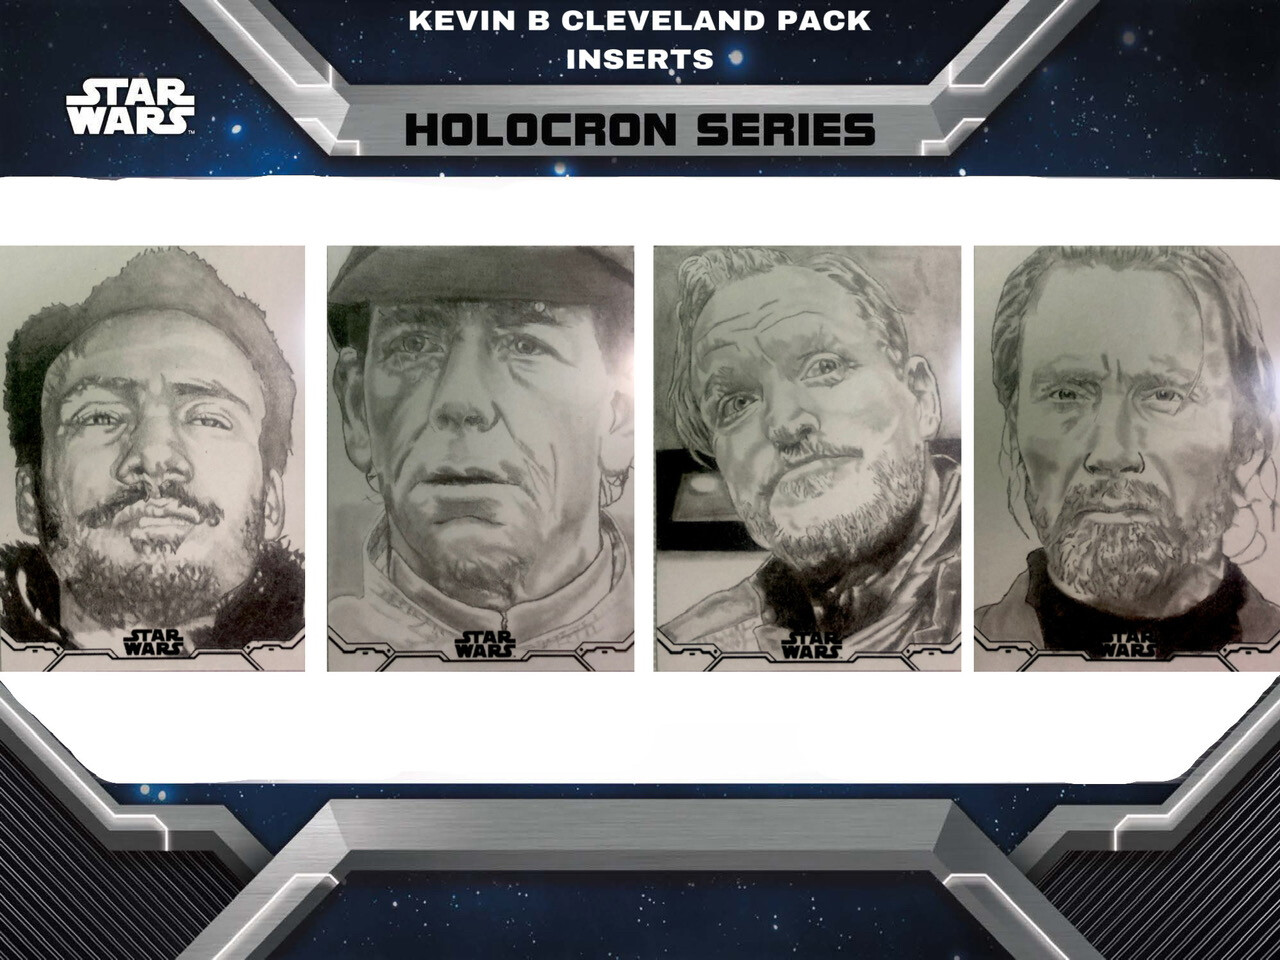 Topps Star Wars Holocron pack inserted sketch cards